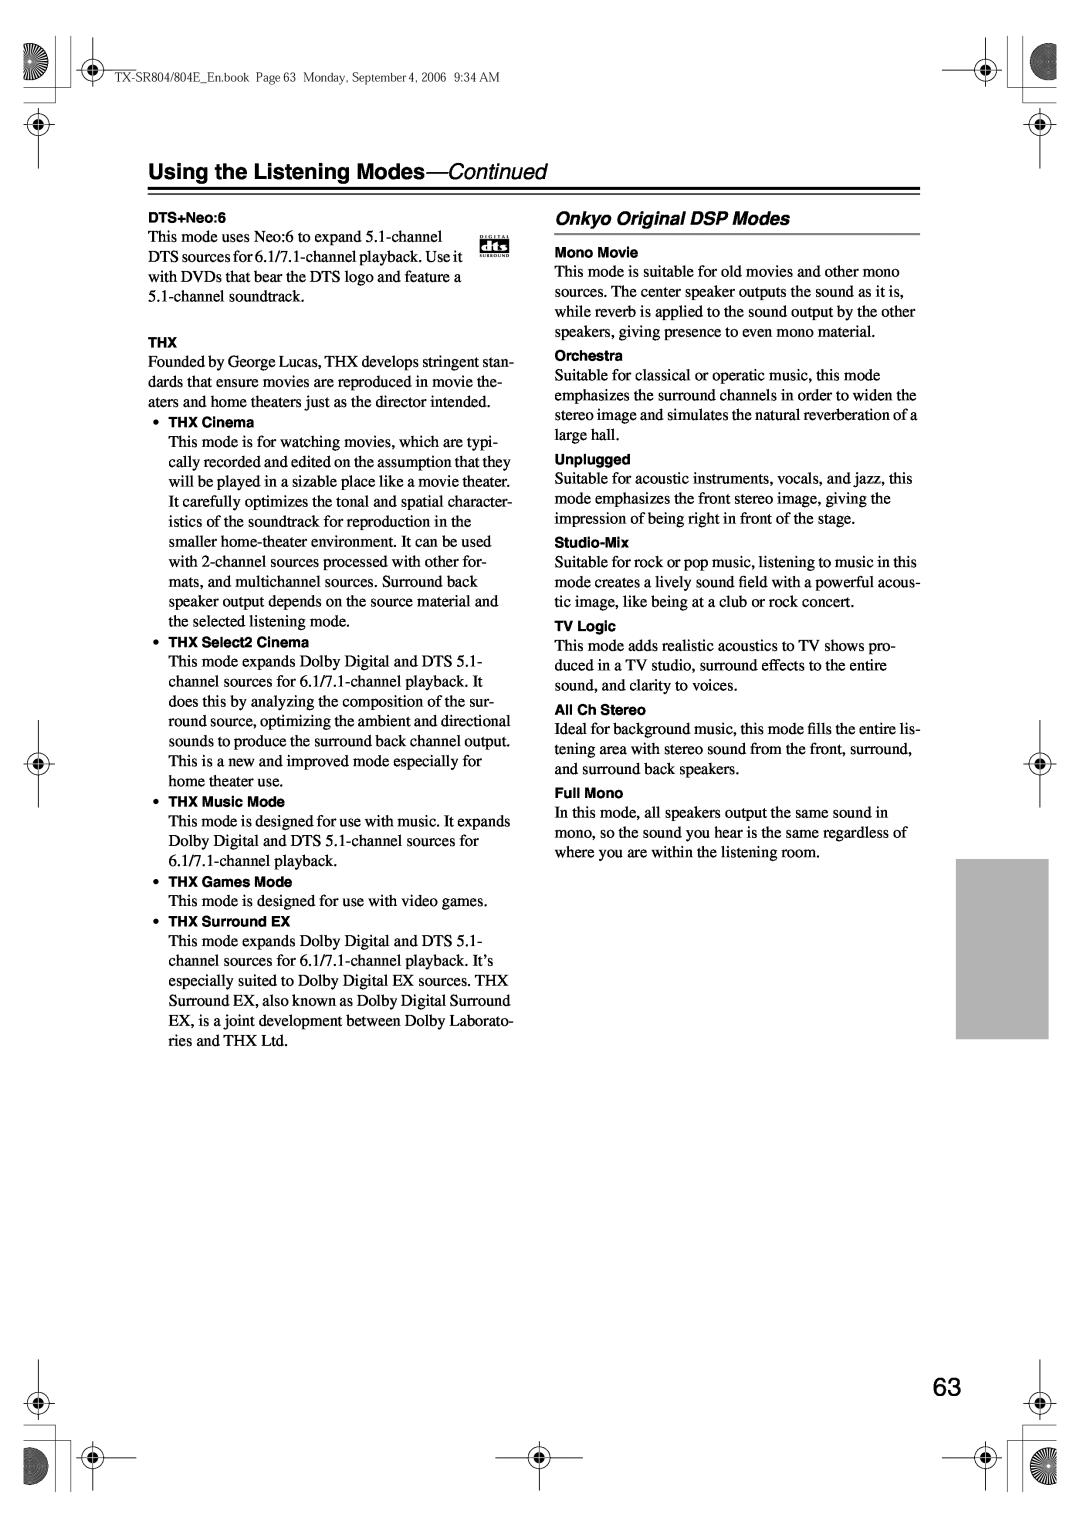 Onkyo TX-SR804E instruction manual Onkyo Original DSP Modes, Using the Listening Modes—Continued 